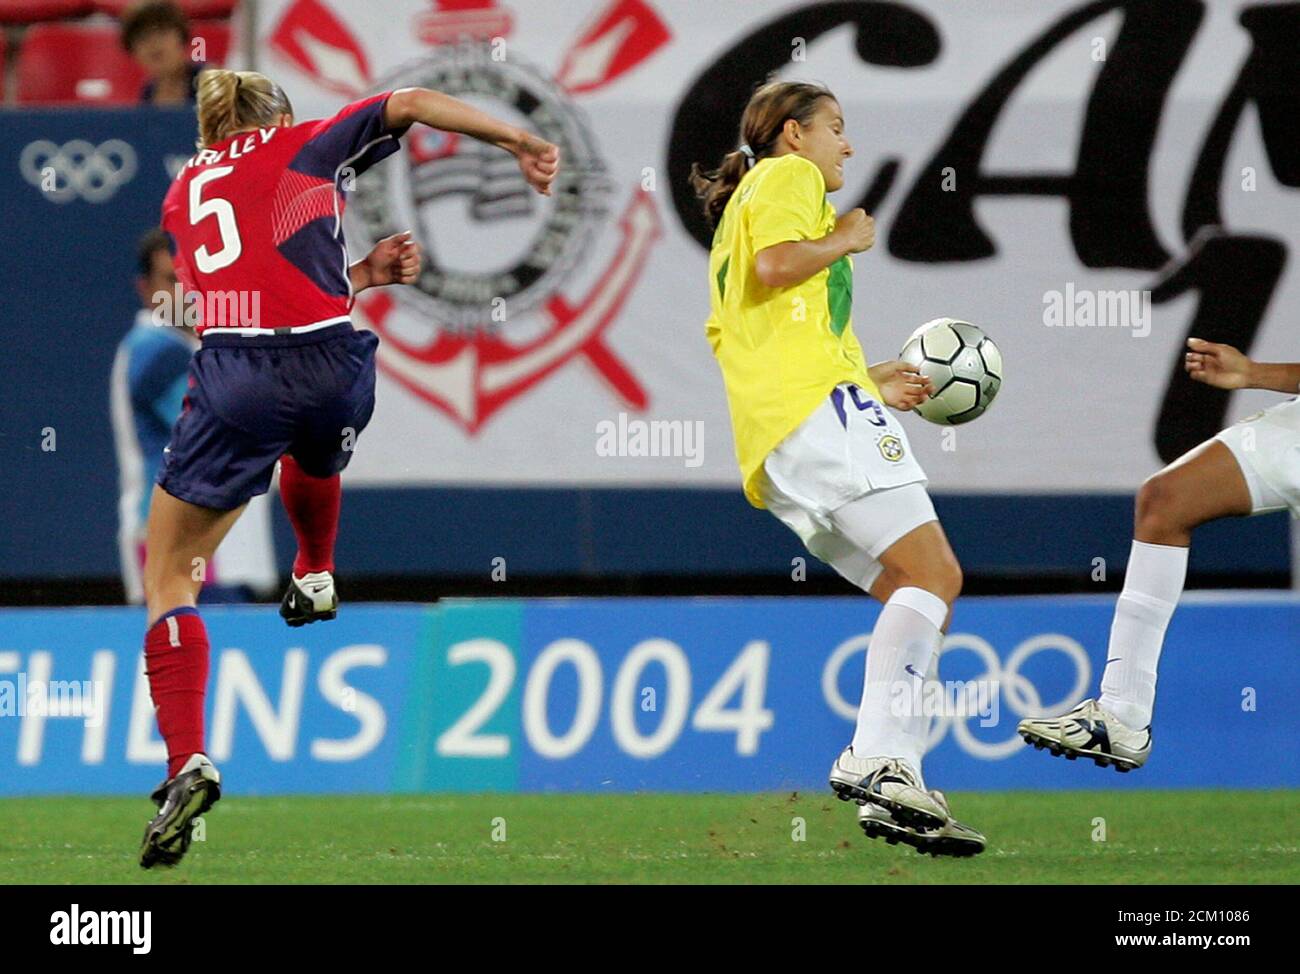 Tarpley of the U.S. scores past Brazil's Maycon during their gold medal match in women's Olympic soccer competition.  Linsay Tarpley of the U.S. (L) shoots past Brazil's Maycon to score during their gold medal match in the women's soccer competition at the Athens 2004 Olympic Games August 26, 2004. REUTERS/Max Rossi Stock Photo